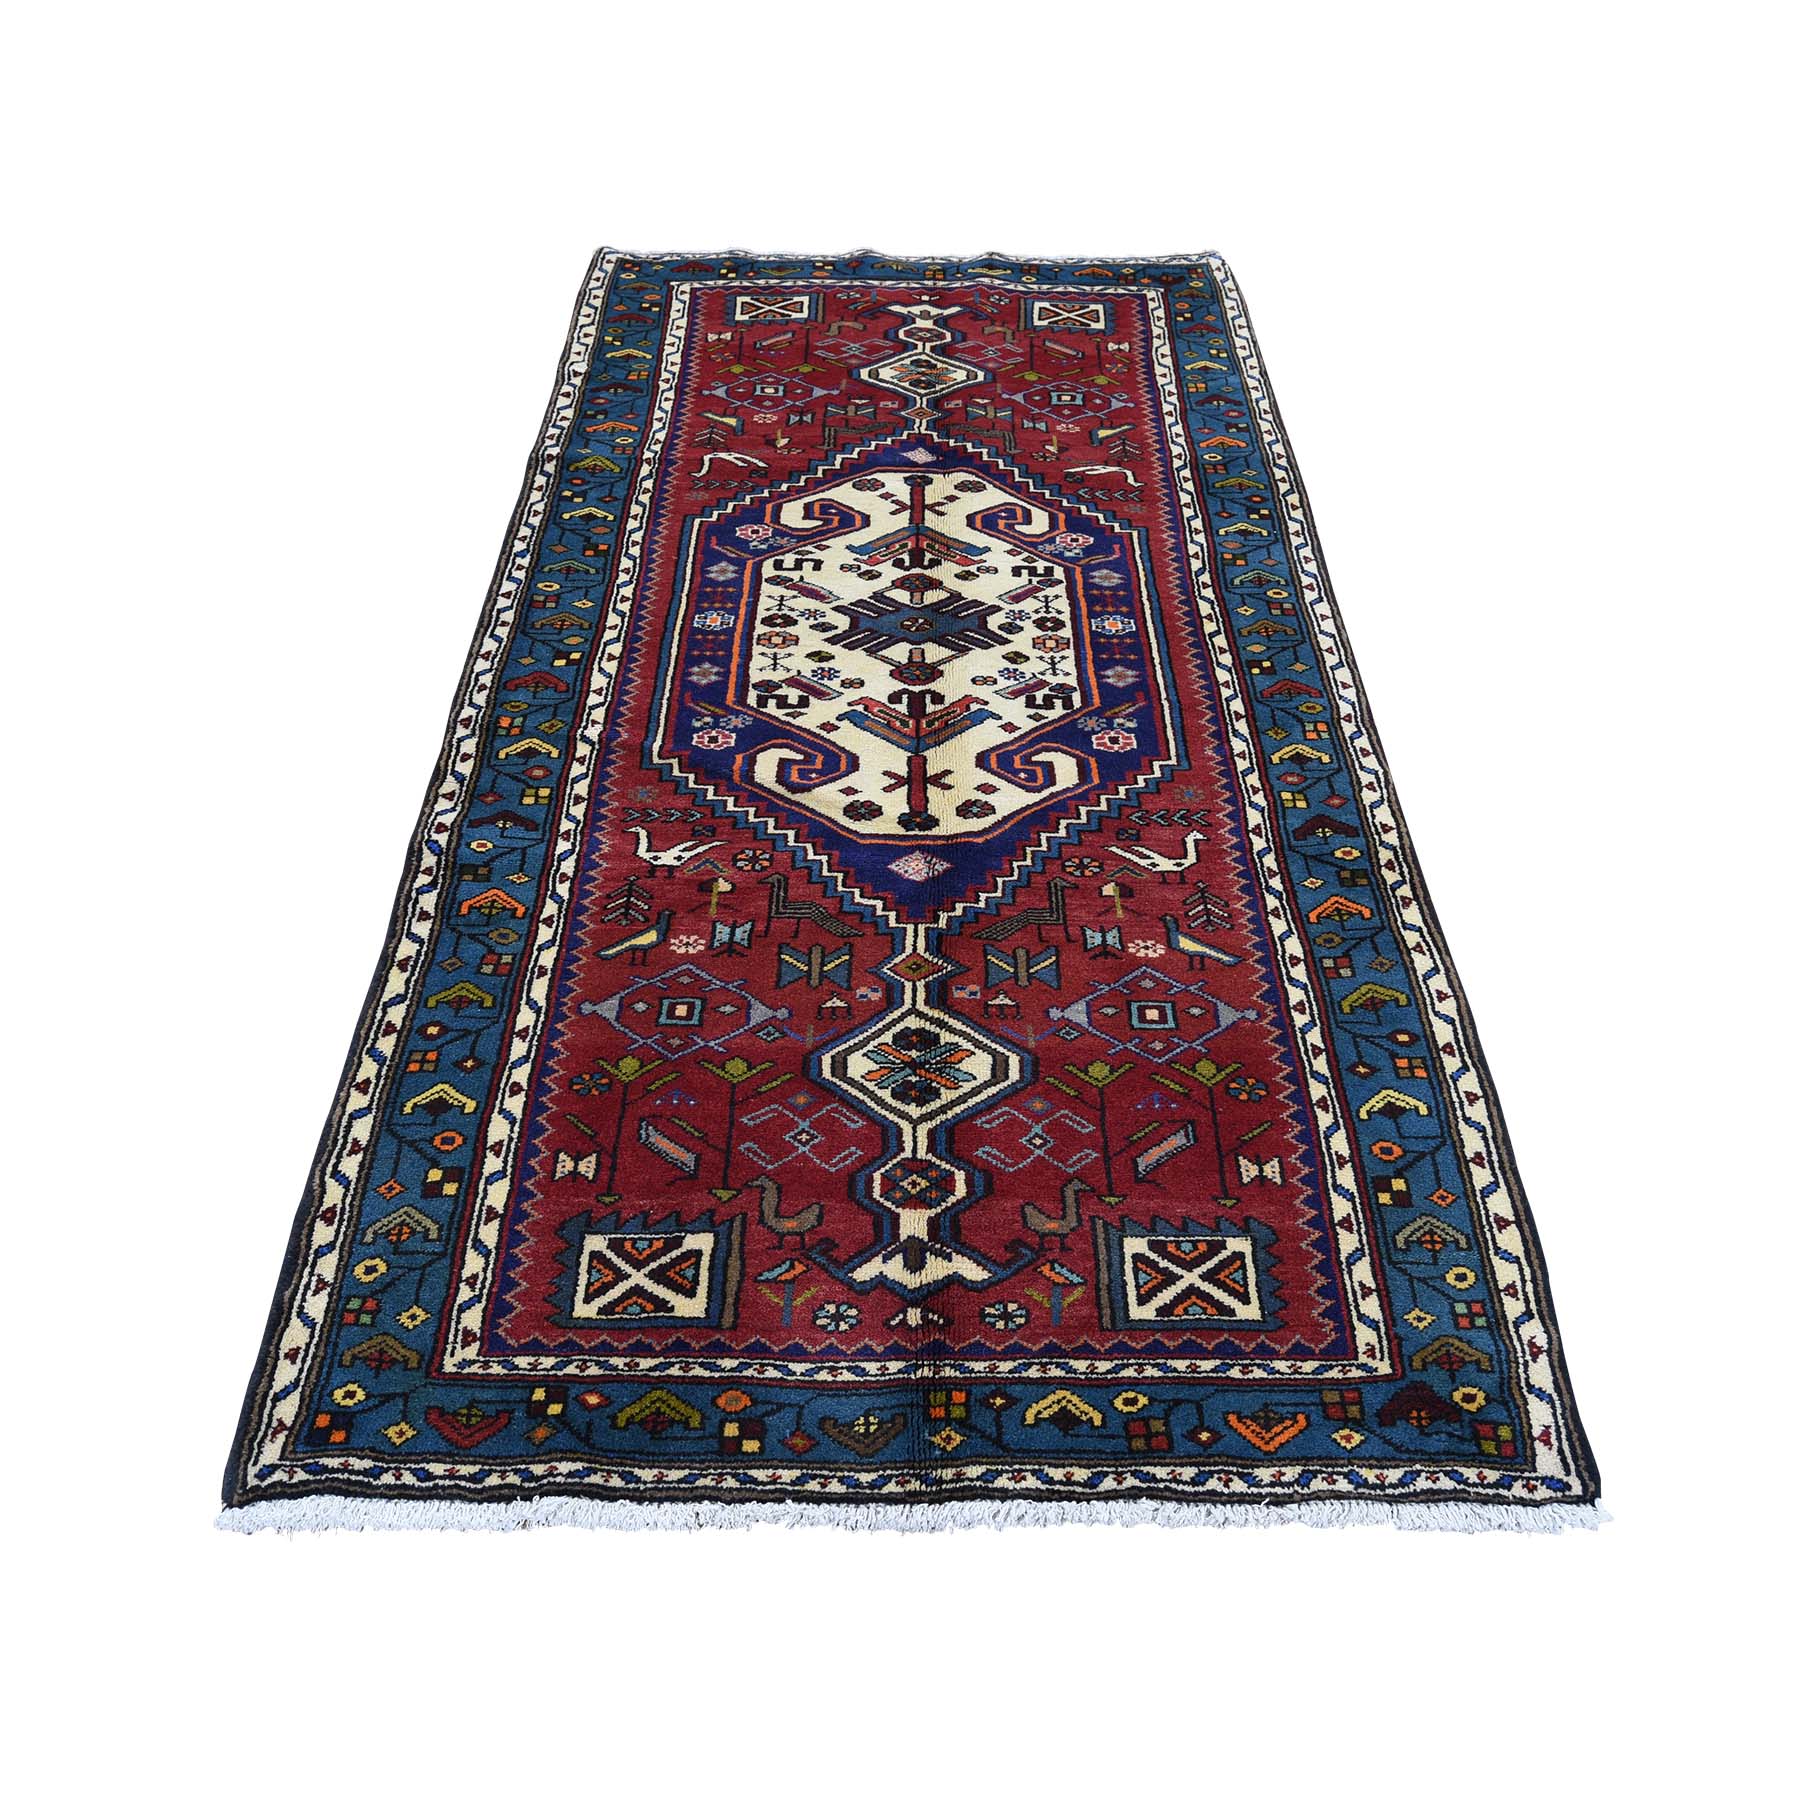 3'4"x6'8" Pure Wool Hand Woven New Persian Mosel Runner Oriental Rug 